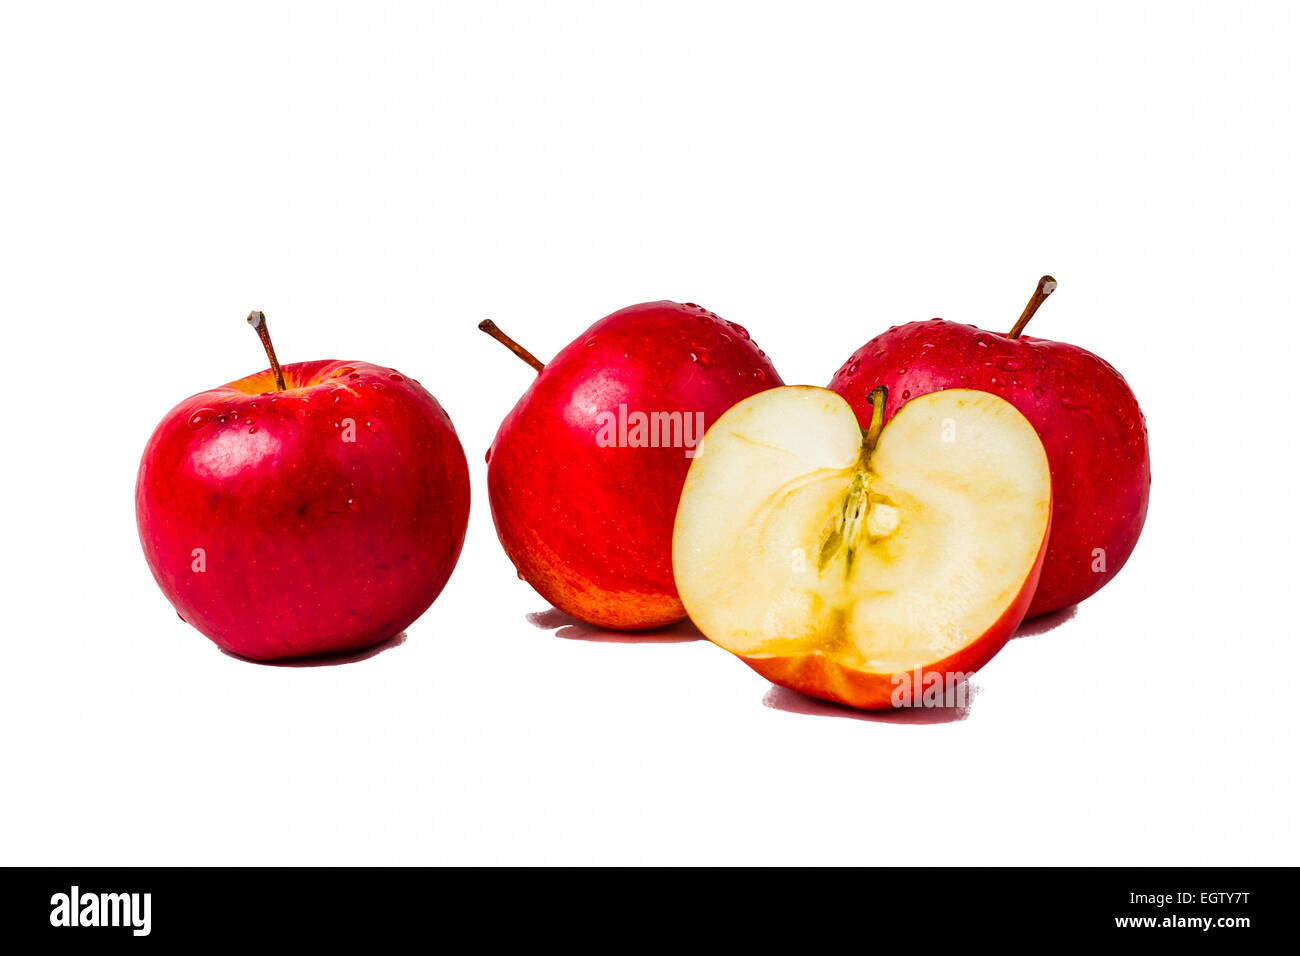 Three red apples and a half apple isolated against white background Stock Photo